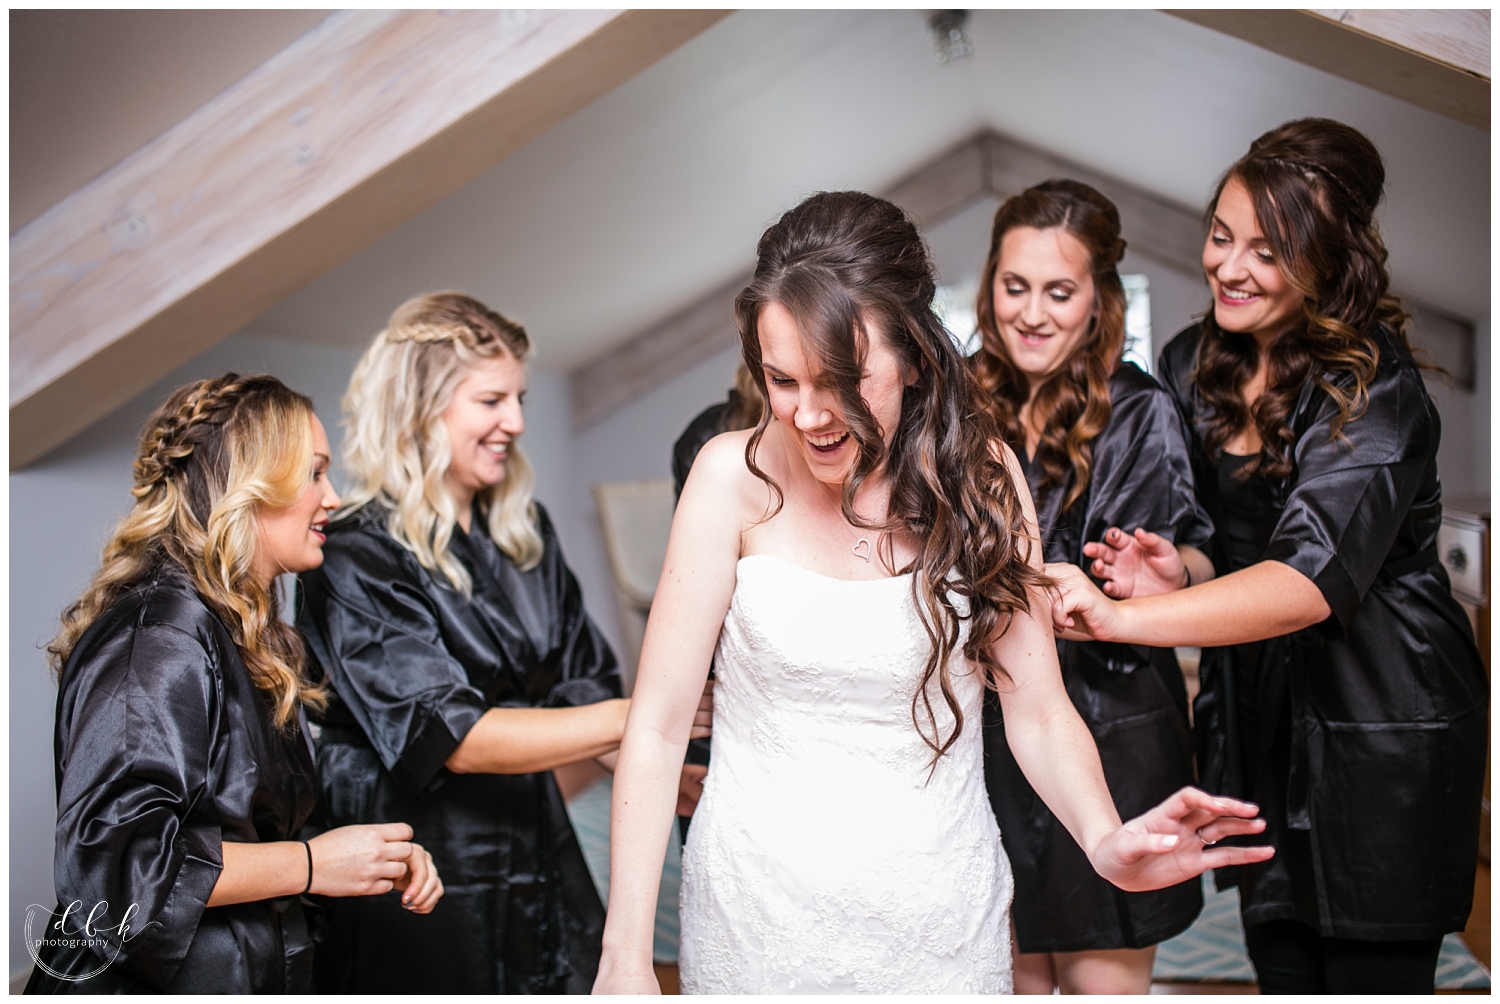 Filigree Farm fall wedding photography: bride getting ready with her bridesmaids